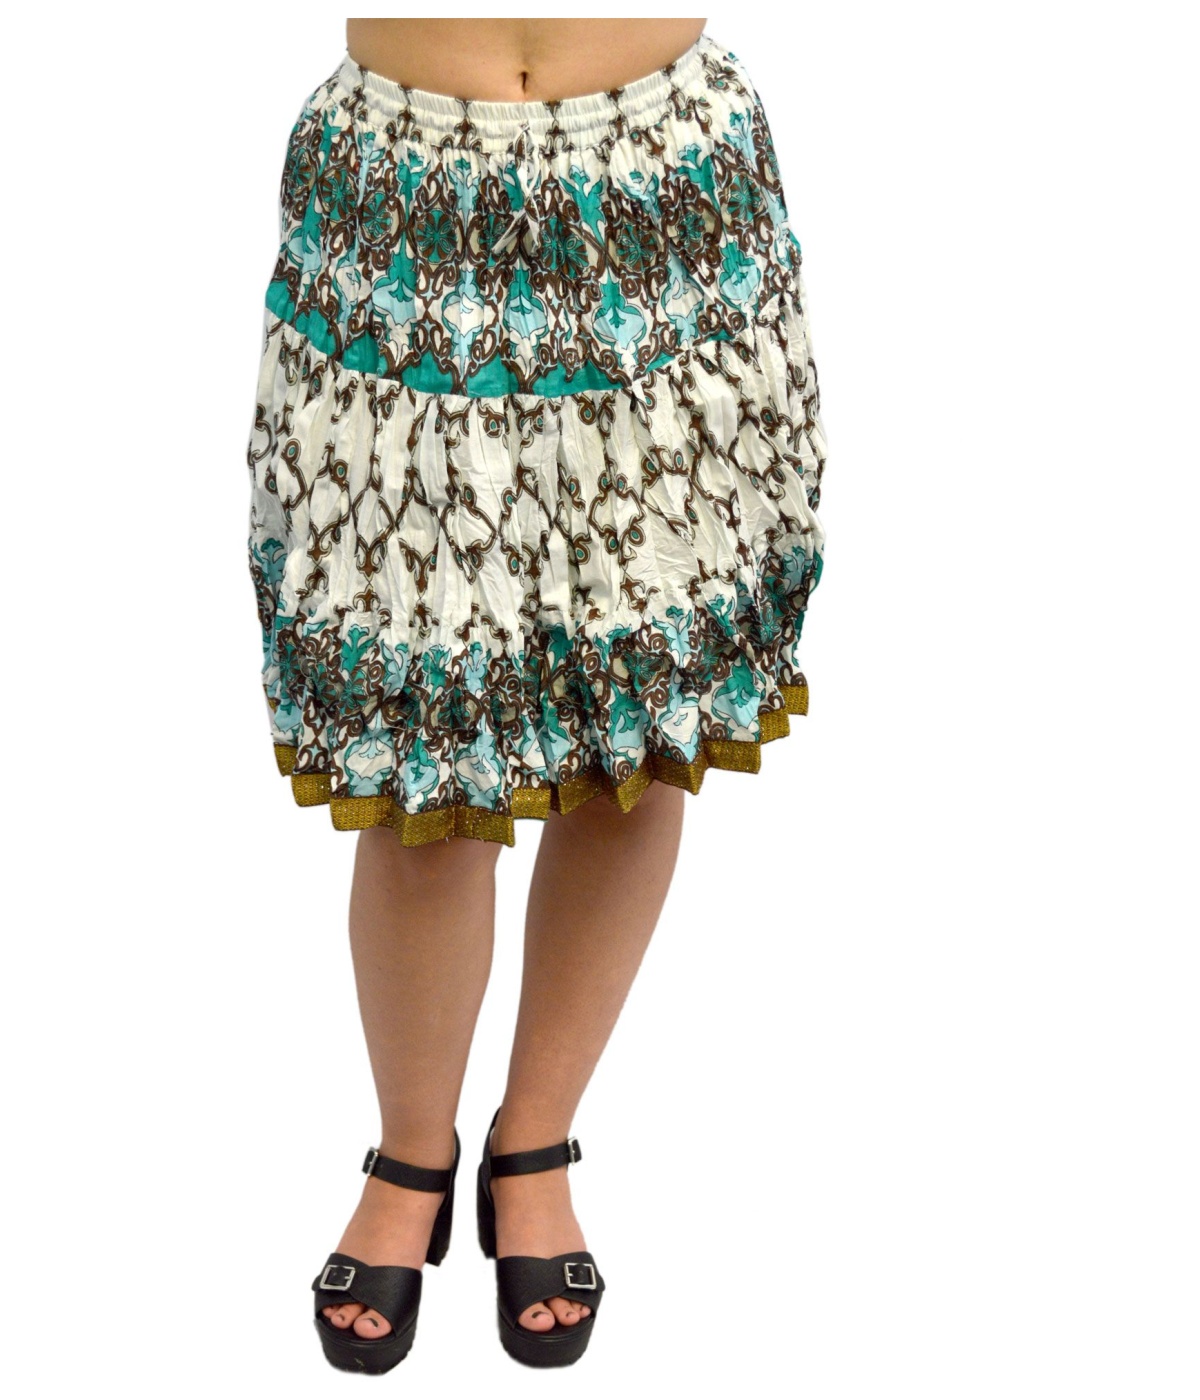 White and Sea Green Cotton Short Skirt - General Category